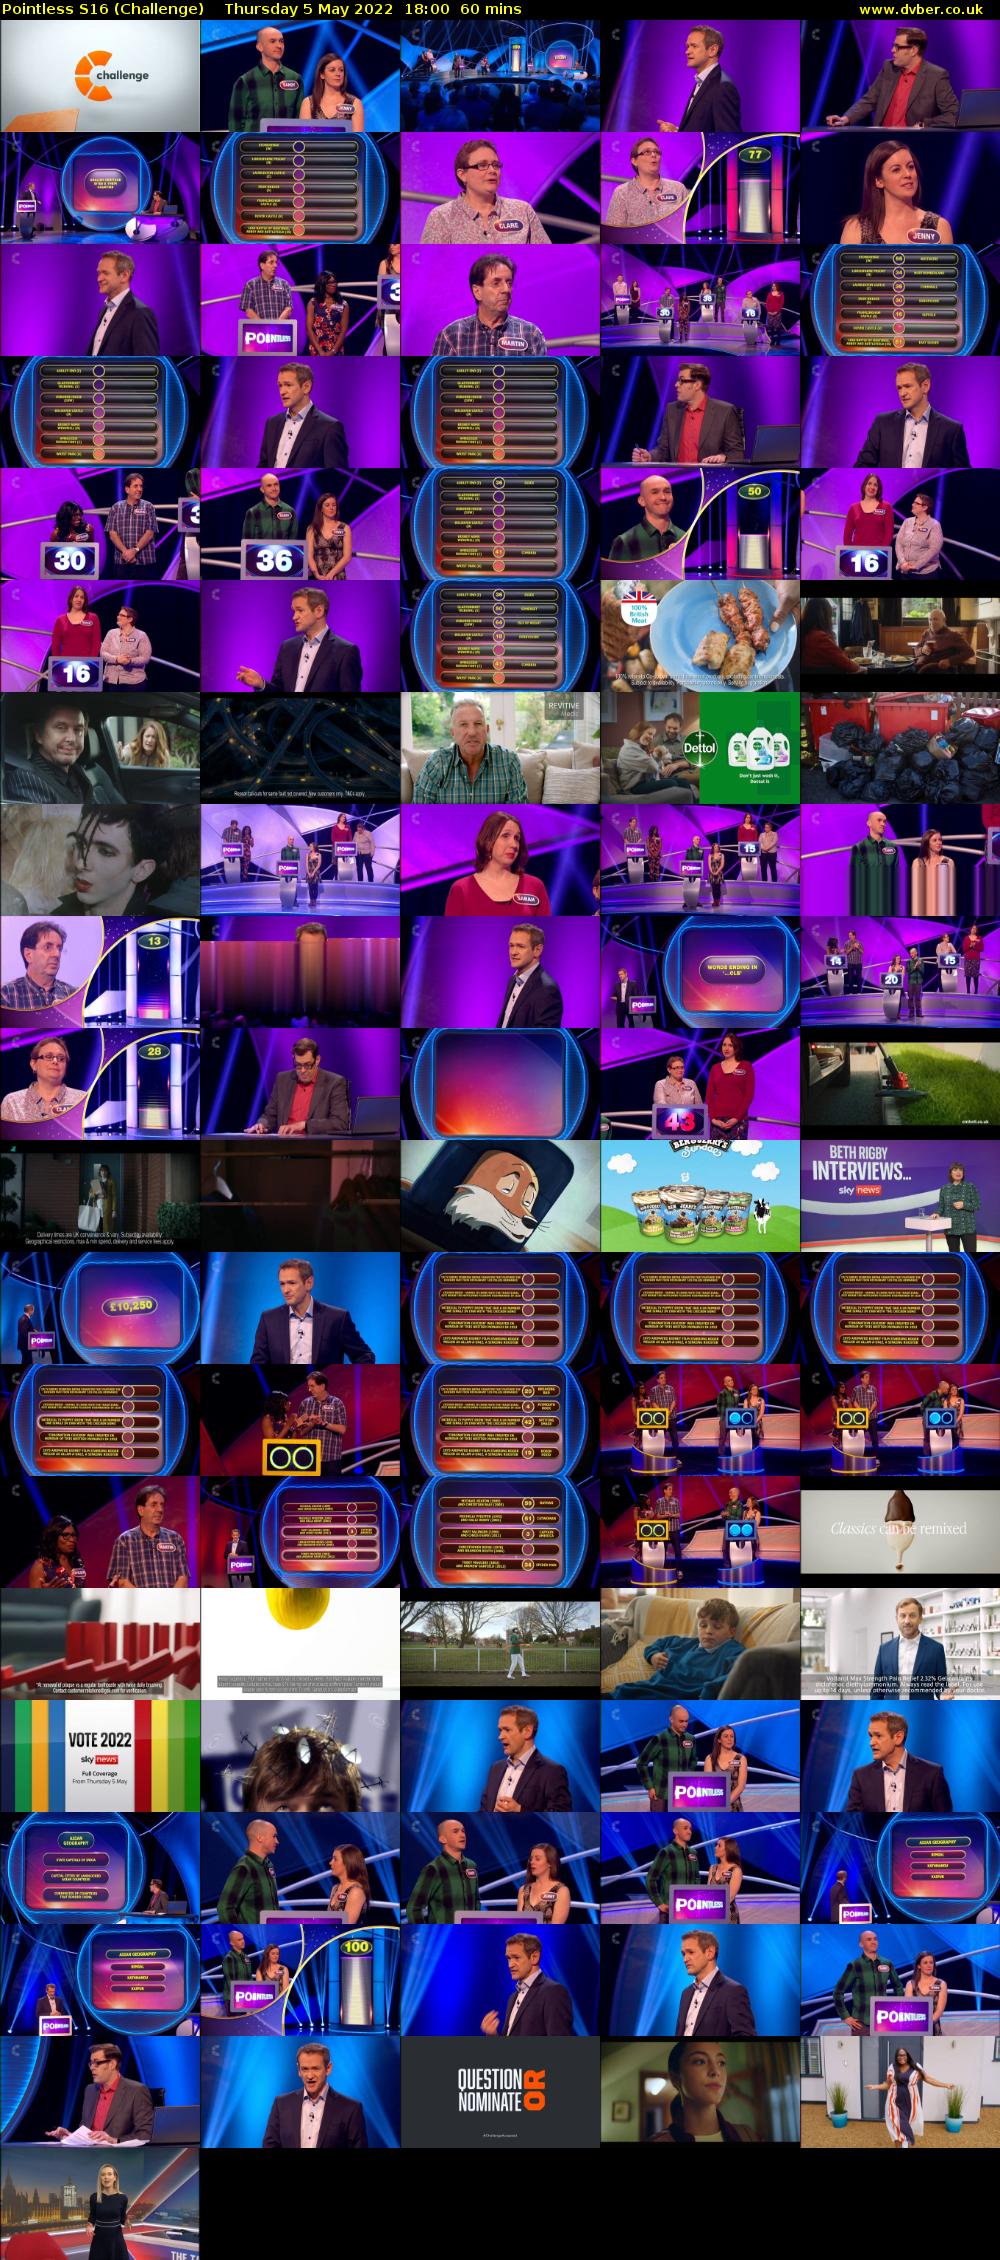 Pointless S16 (Challenge) Thursday 5 May 2022 18:00 - 19:00